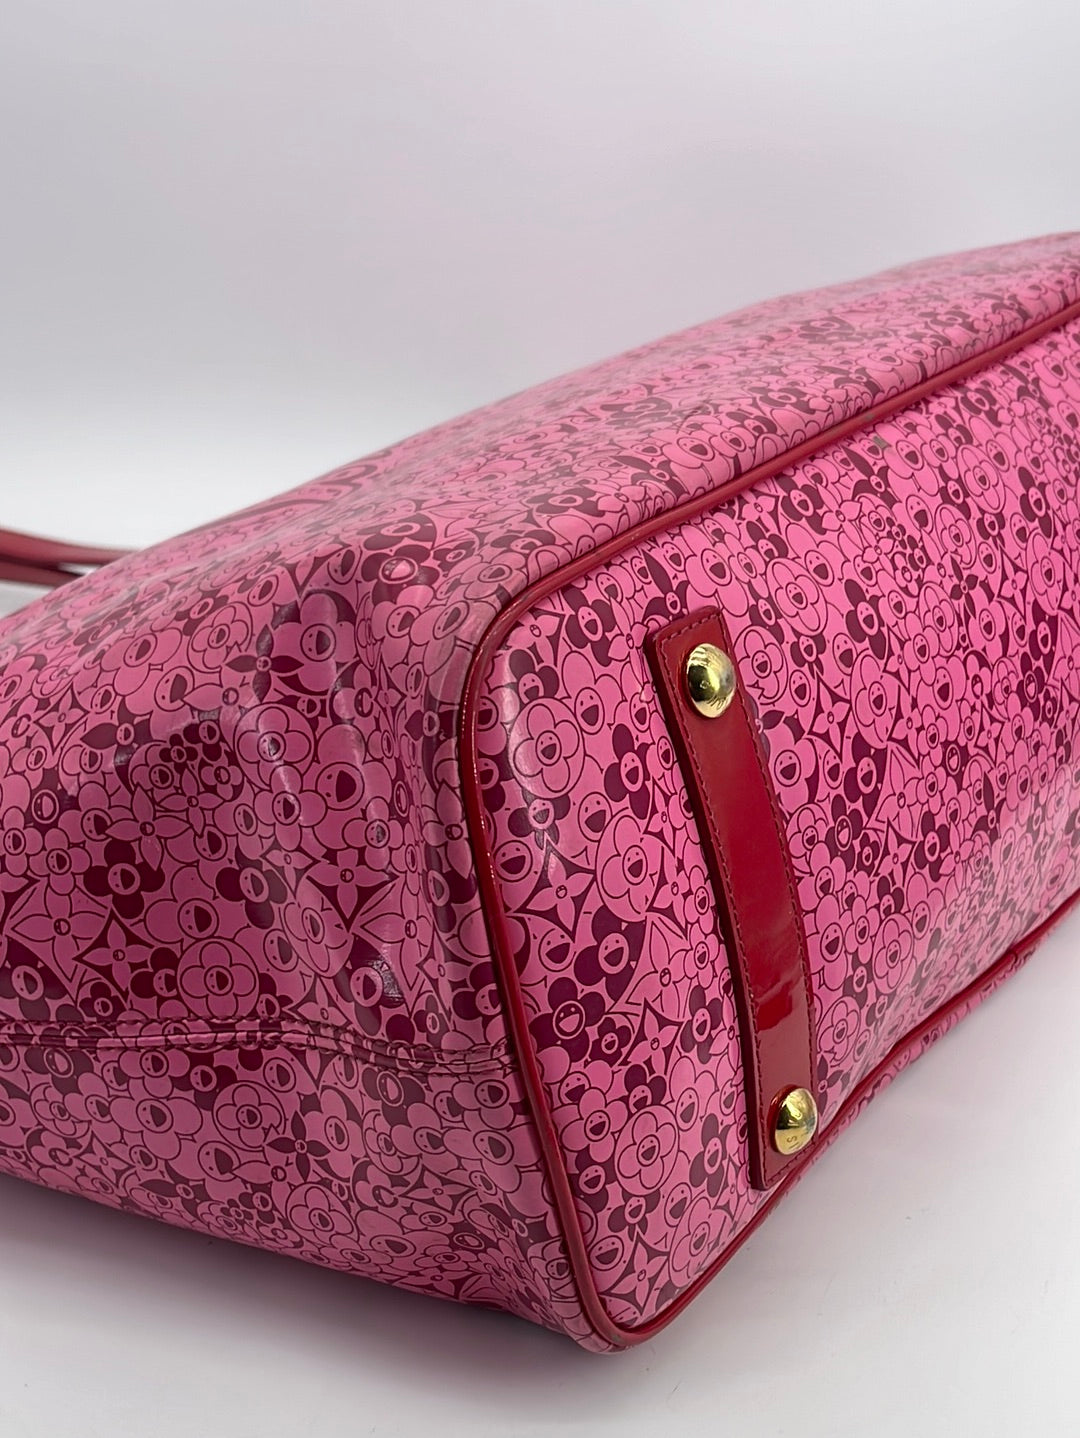 Louis-Vuitton-Cosmic-Blossom-PM-Tote-Bag-Rose-Pink-M93166 – dct